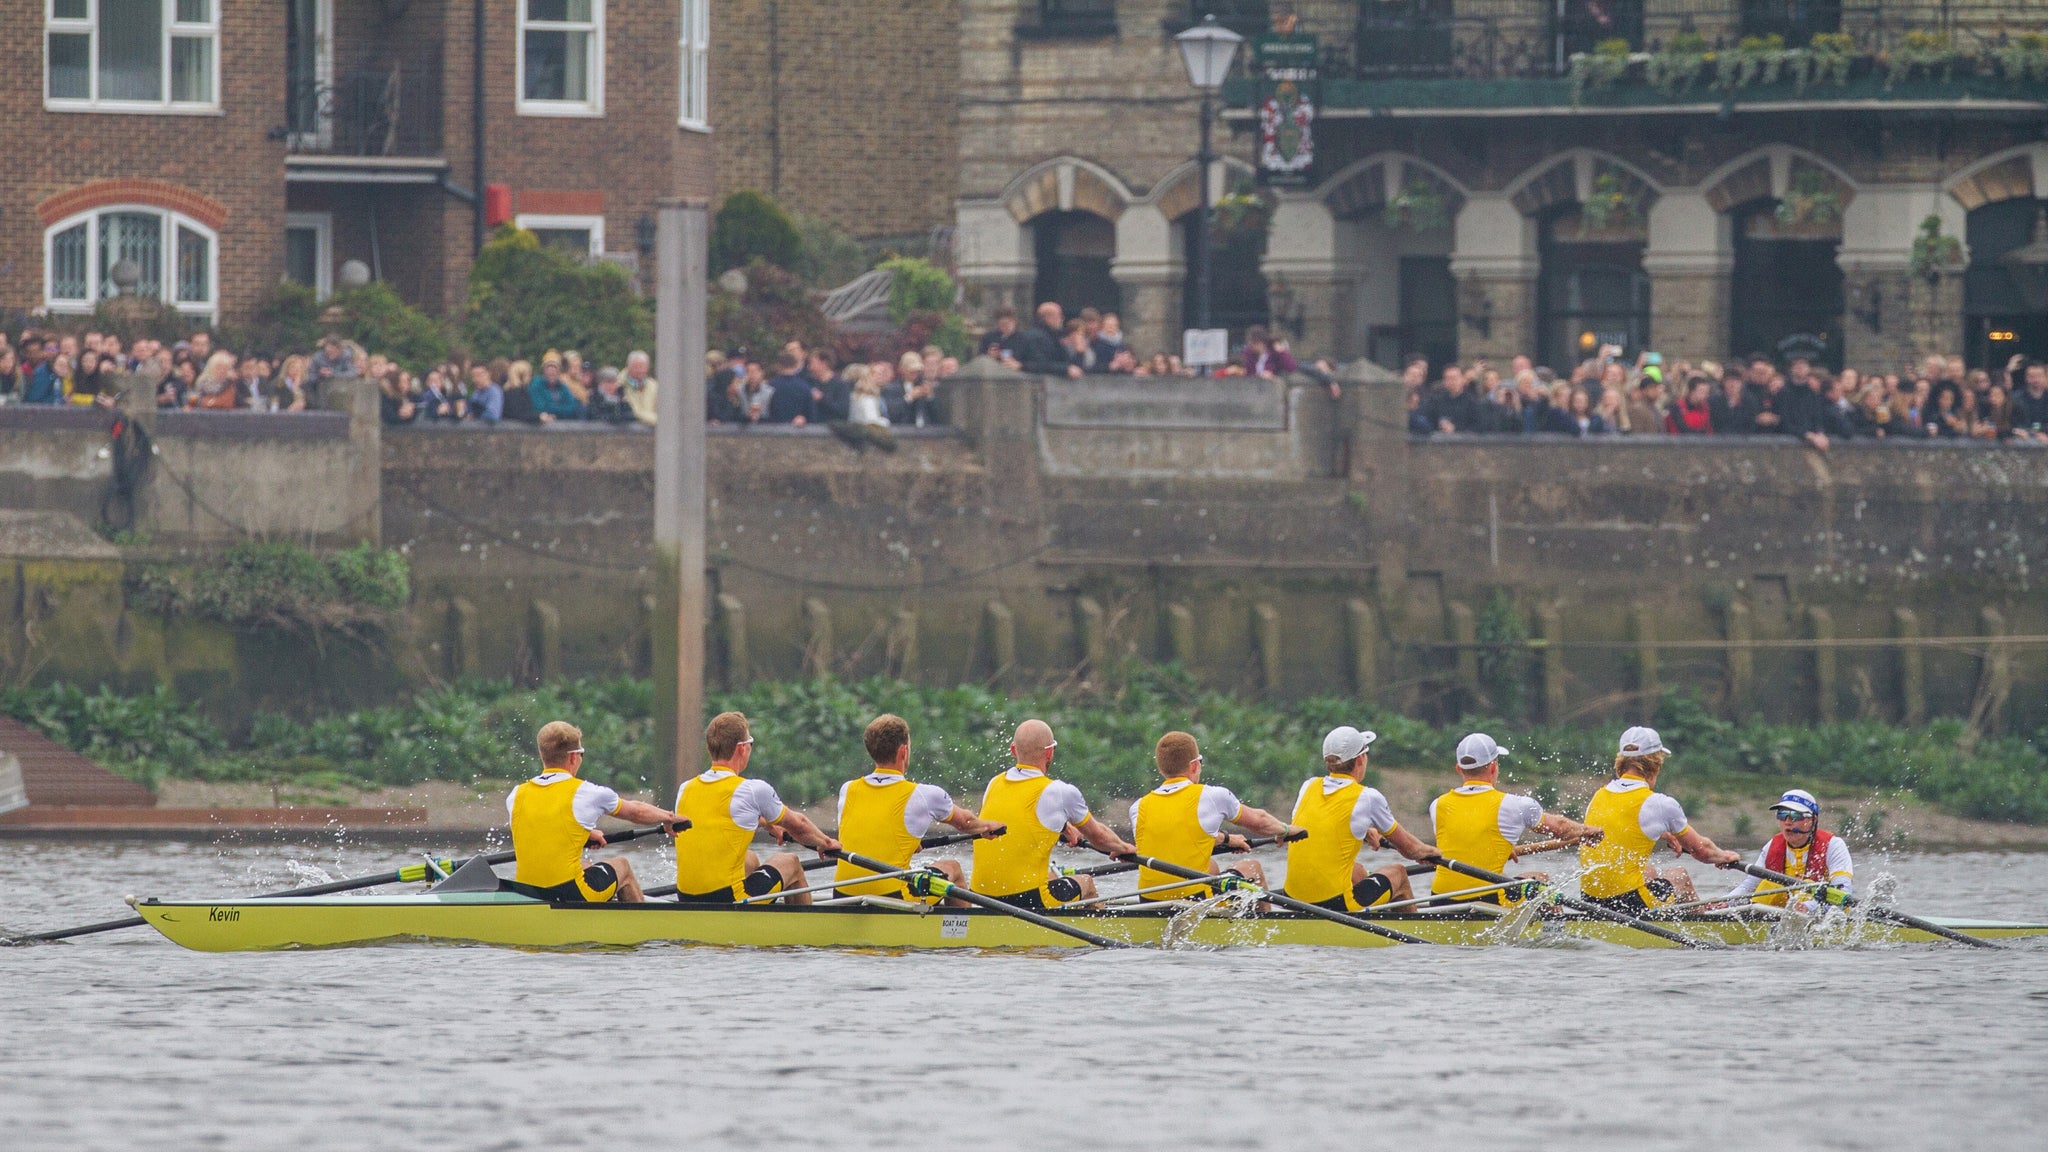 The Boat Race 2019 - Reserve Boat Race Review